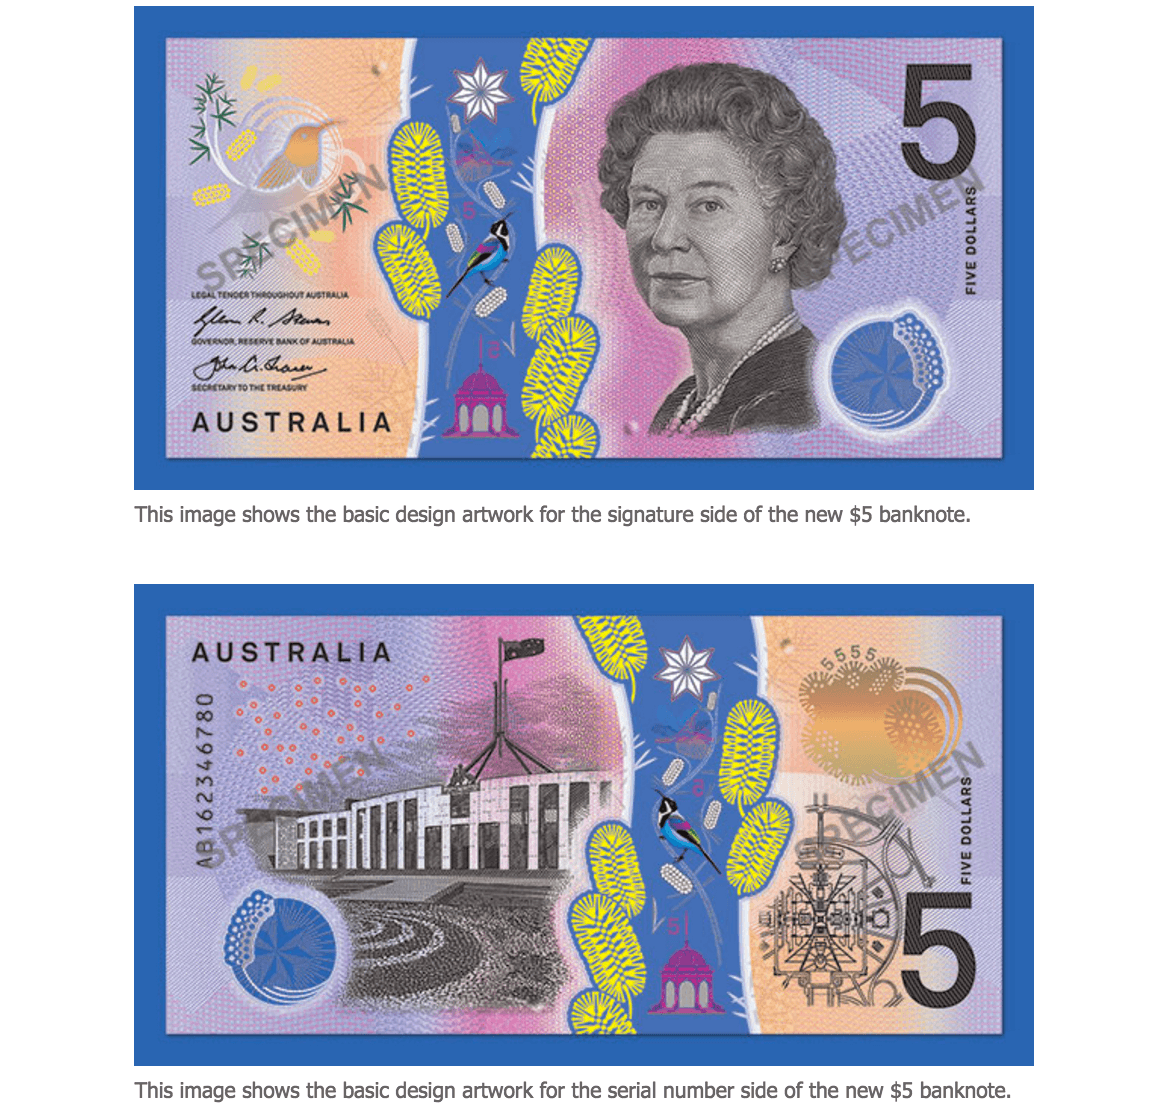 Colorful ‘vomit-like’ Australian $5 note unveiled